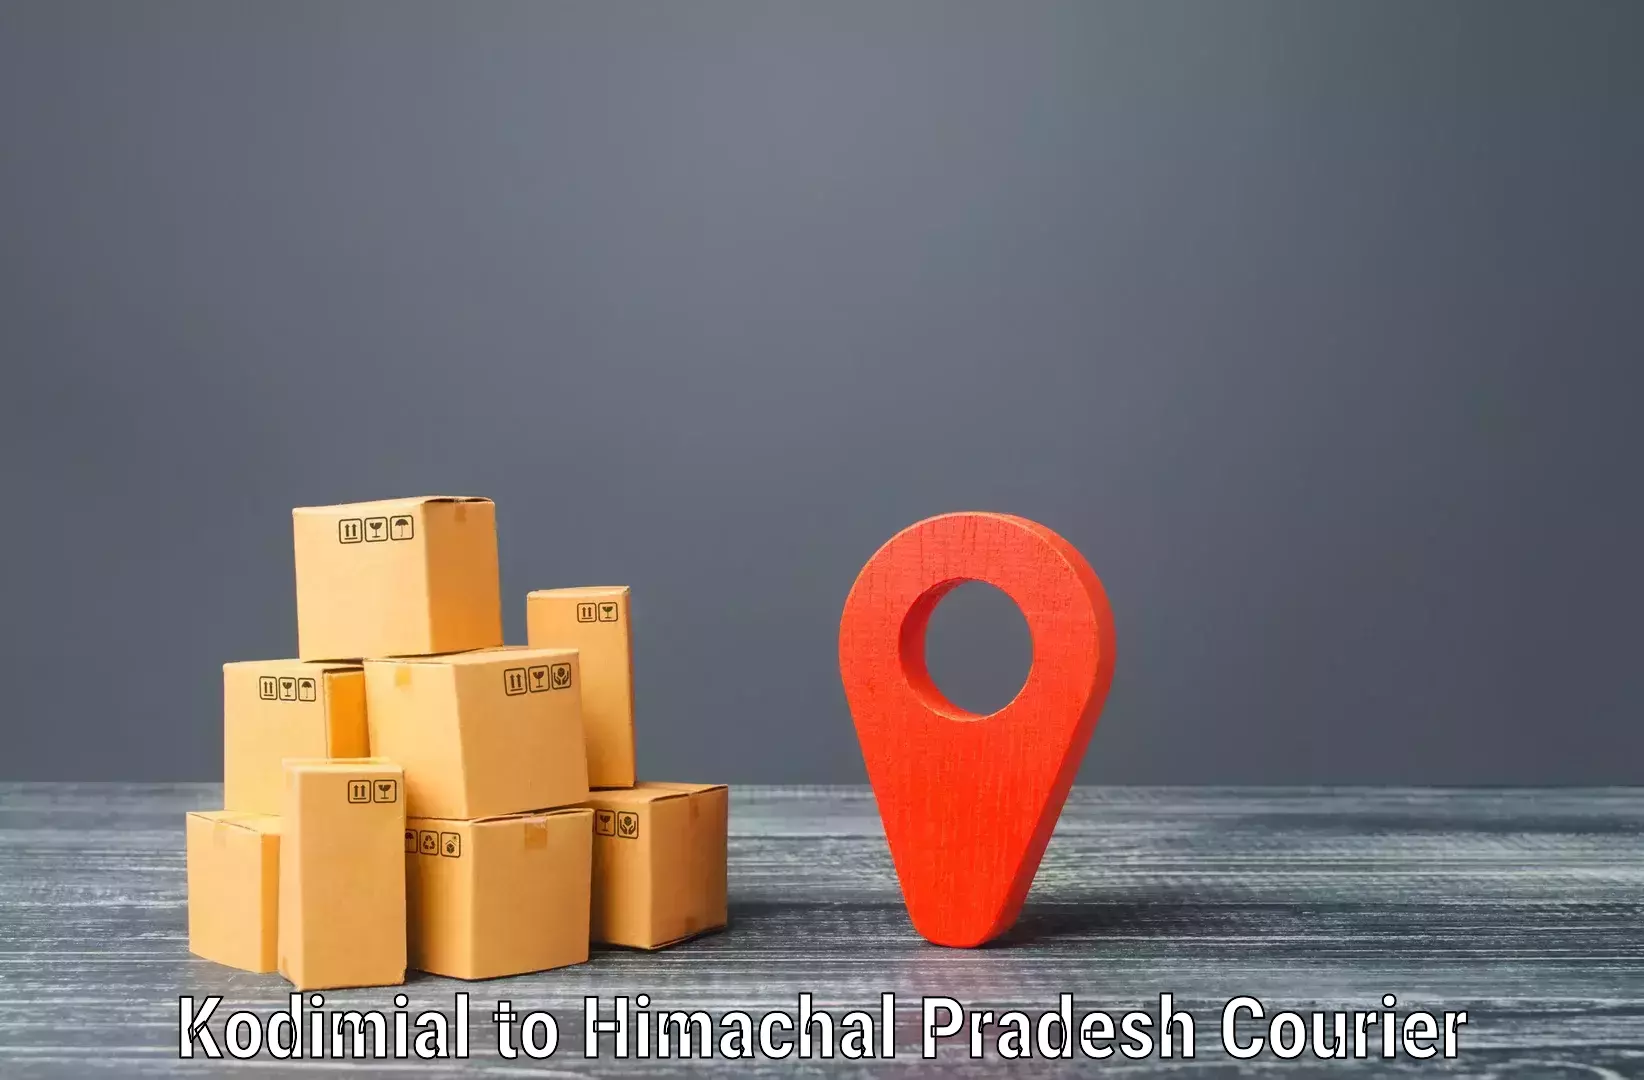 Courier service efficiency in Kodimial to Dharamshala